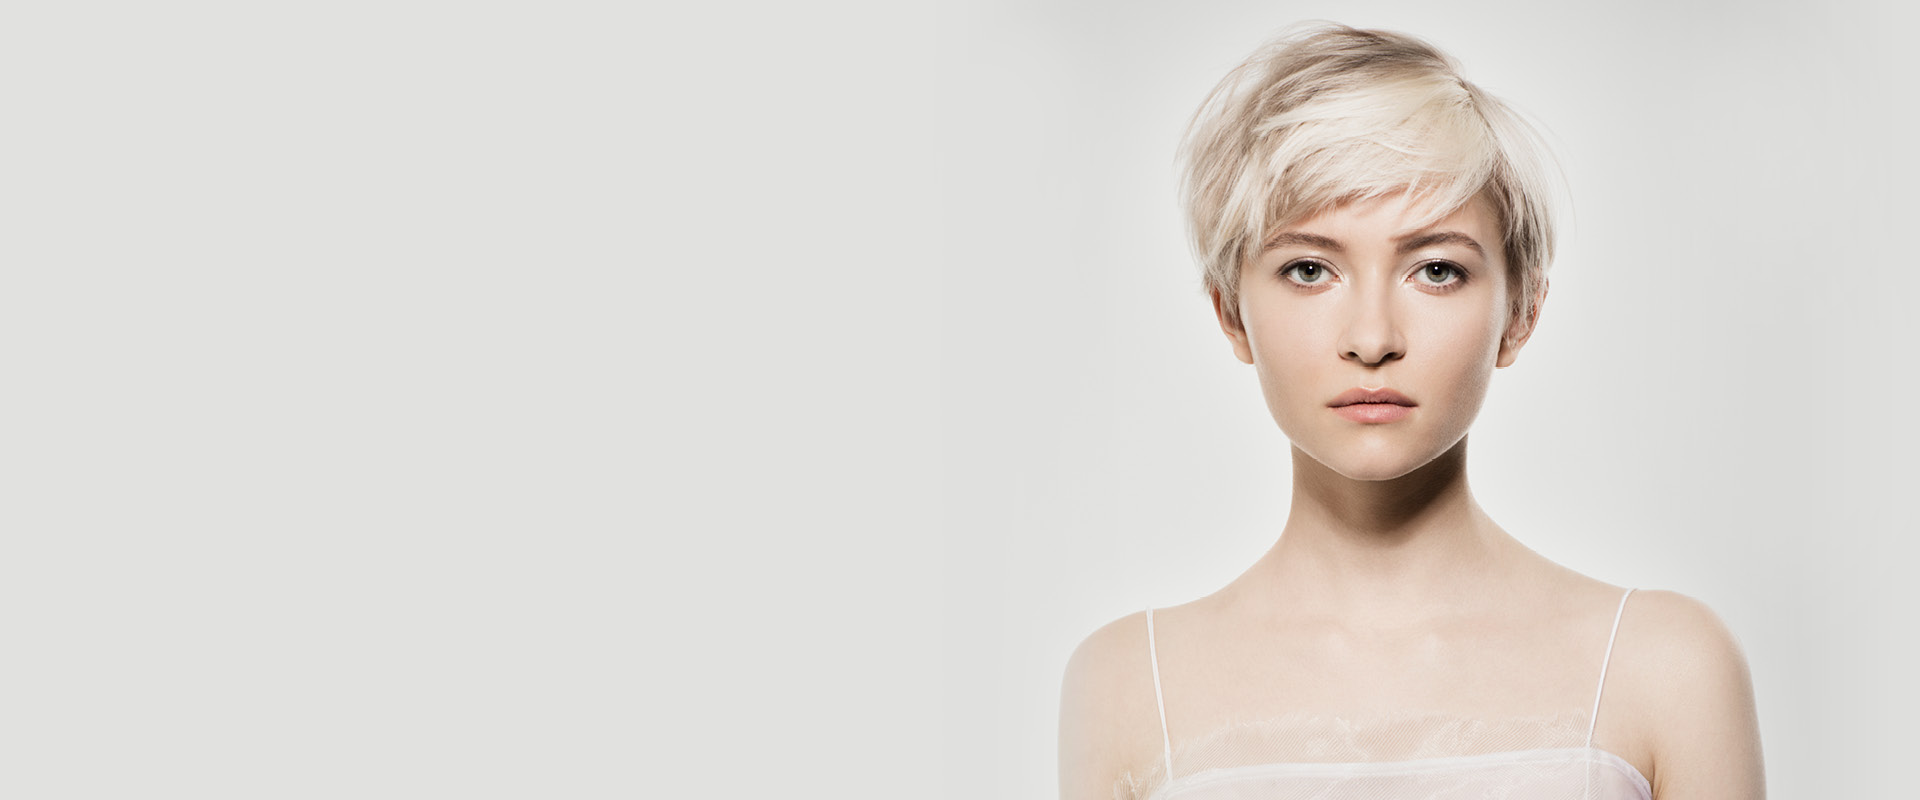 Course | ABC Colouring Hair the Sassoon Way - Sassoon Online